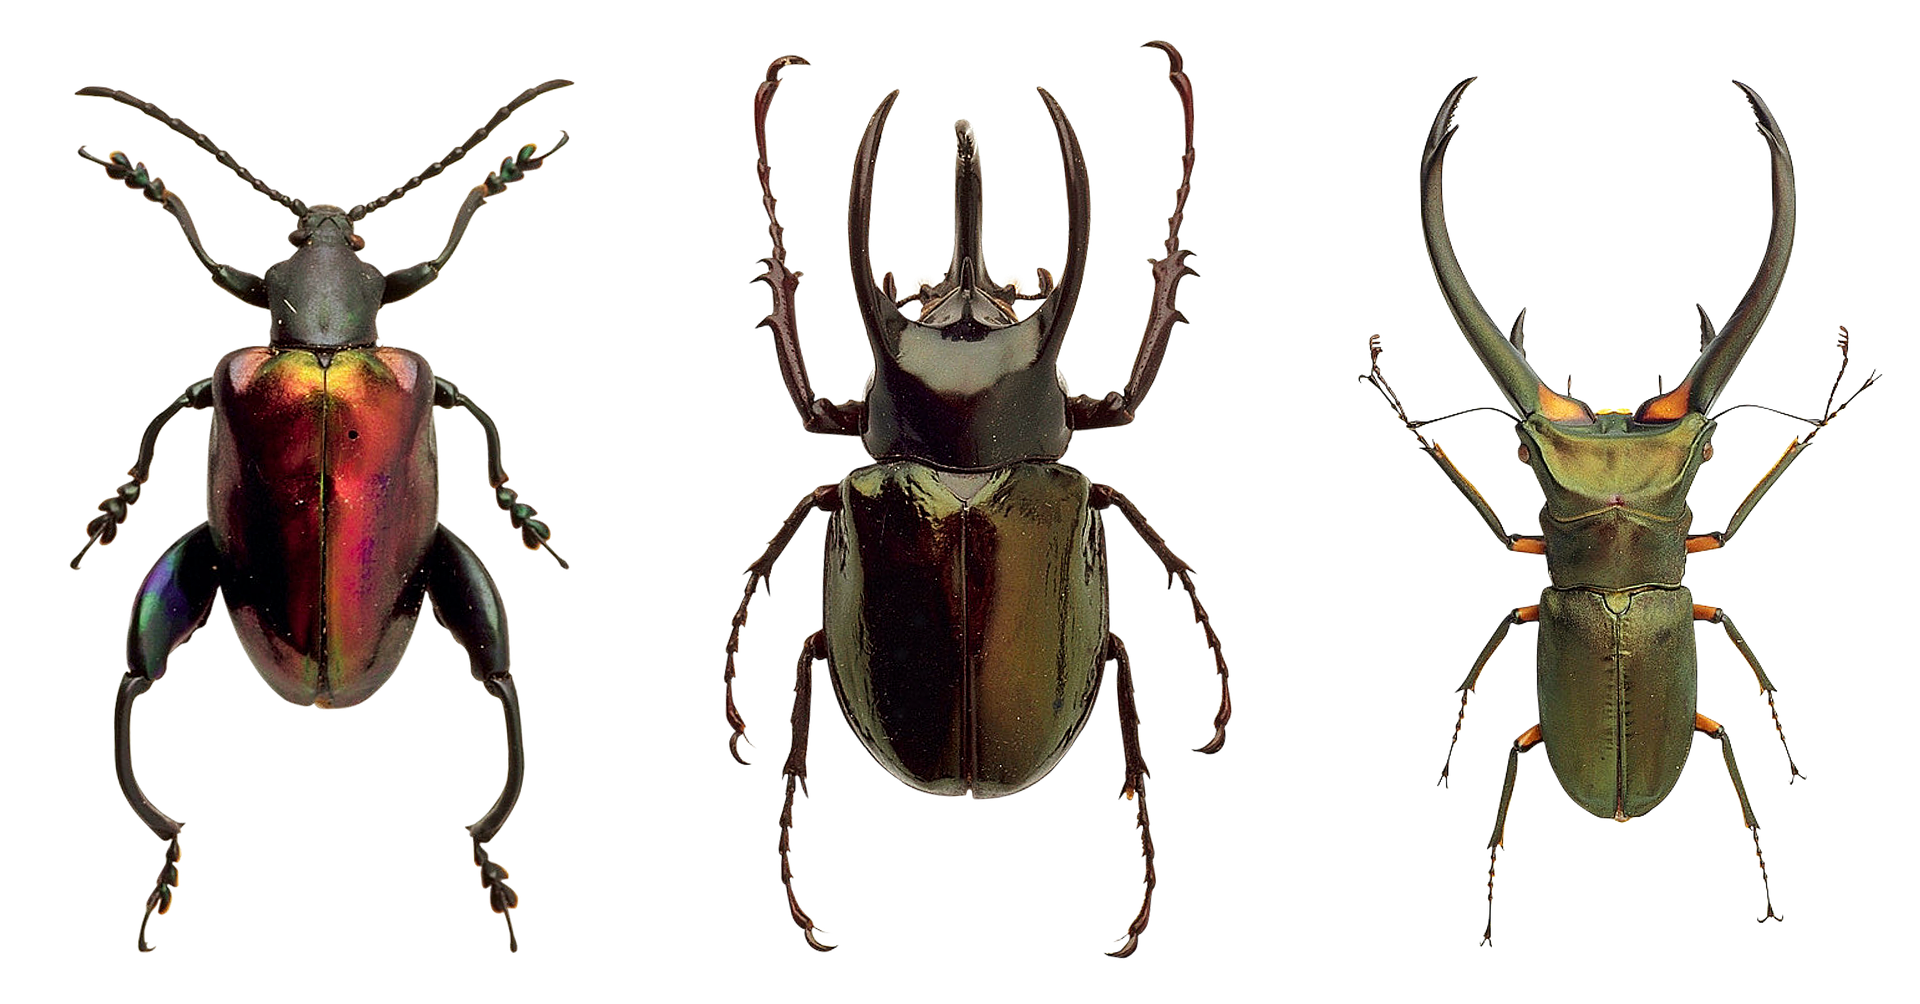 A Group Of Beetles On A Black Background